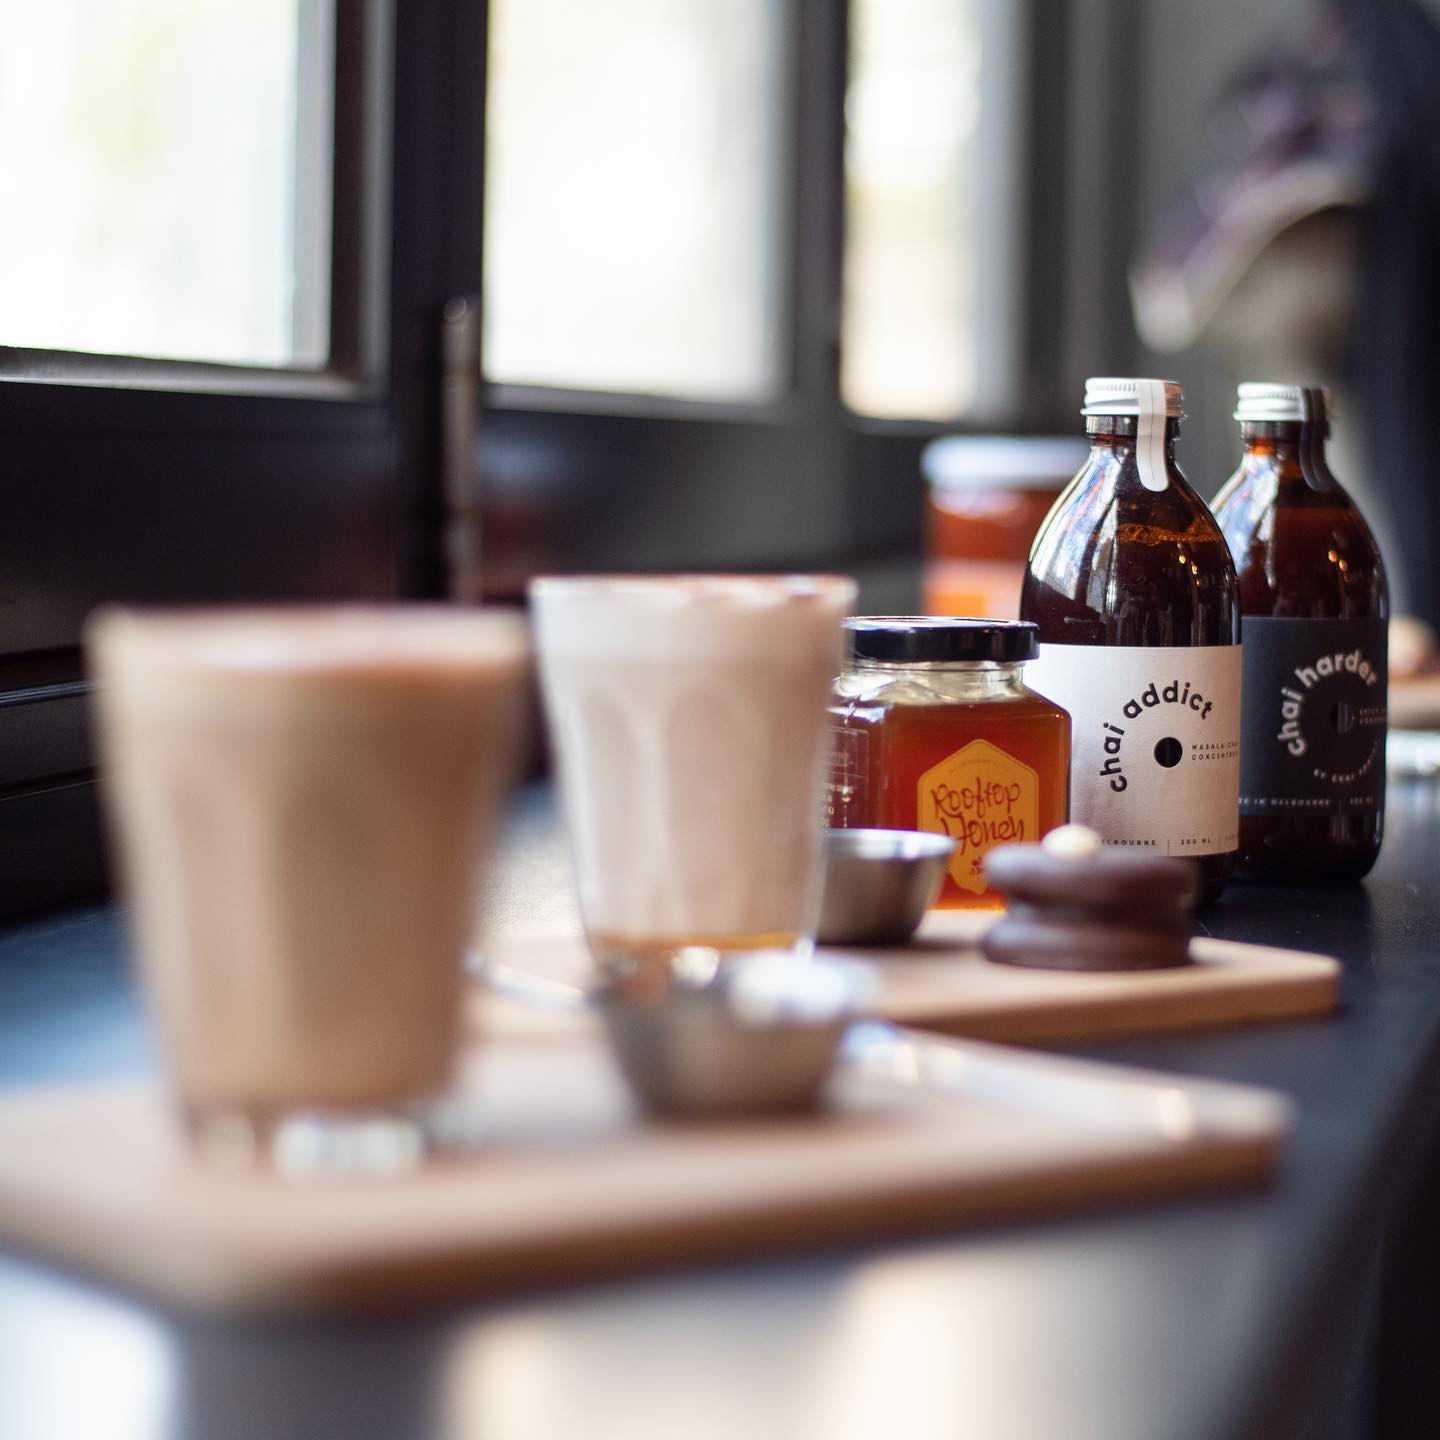 Cups of chai latte brewed served at a cafe accompanying delicious treats, honey and chai latte concentrates